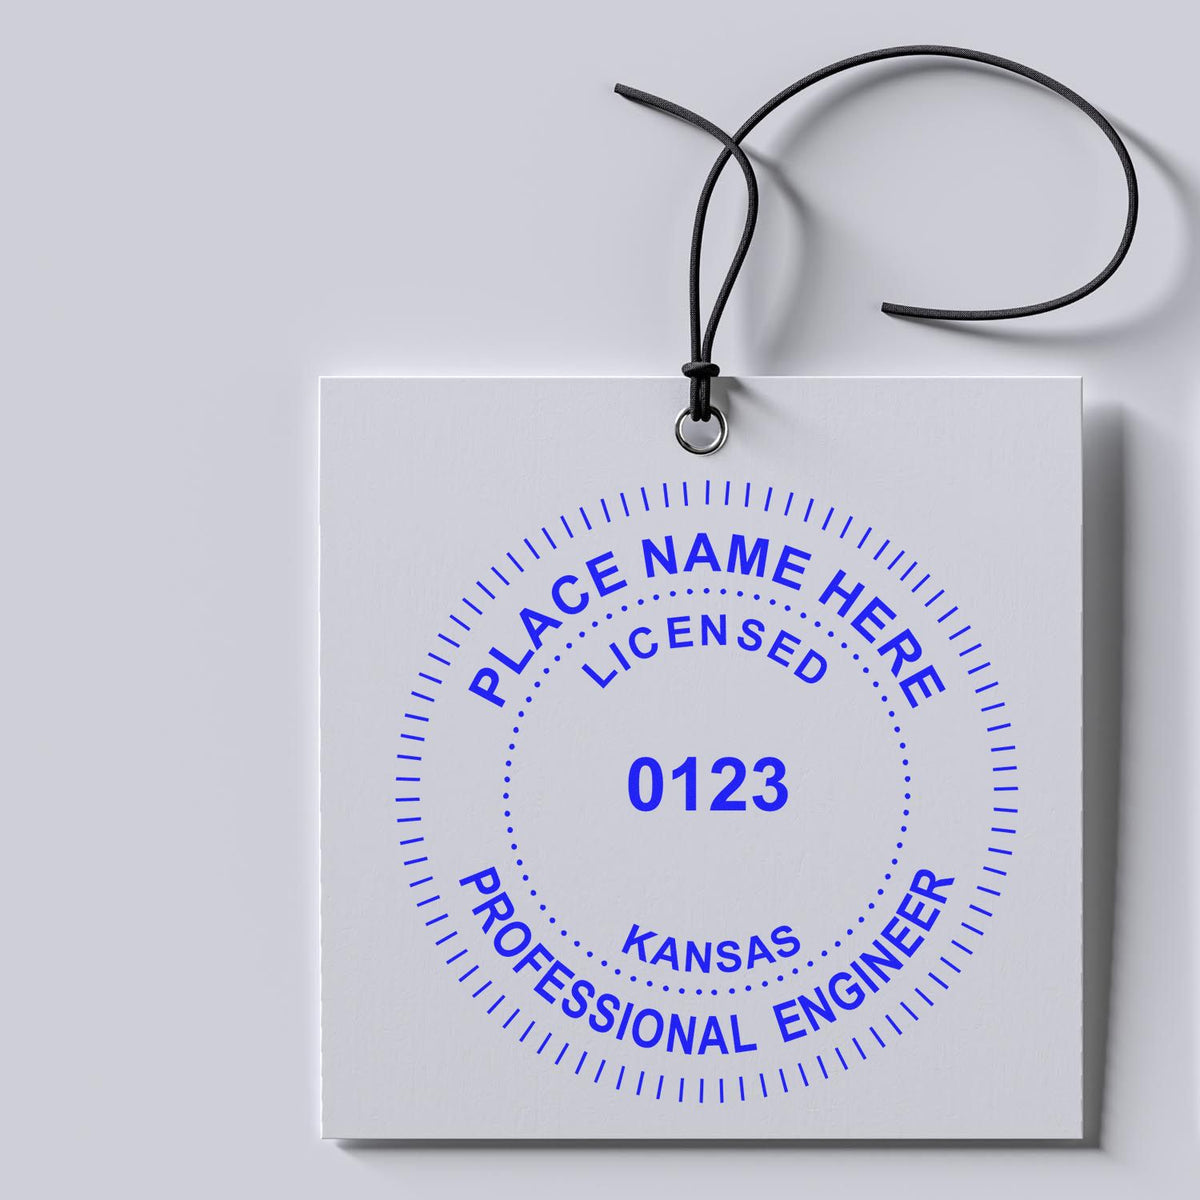 The Slim Pre-Inked Kansas Professional Engineer Seal Stamp stamp impression comes to life with a crisp, detailed photo on paper - showcasing true professional quality.